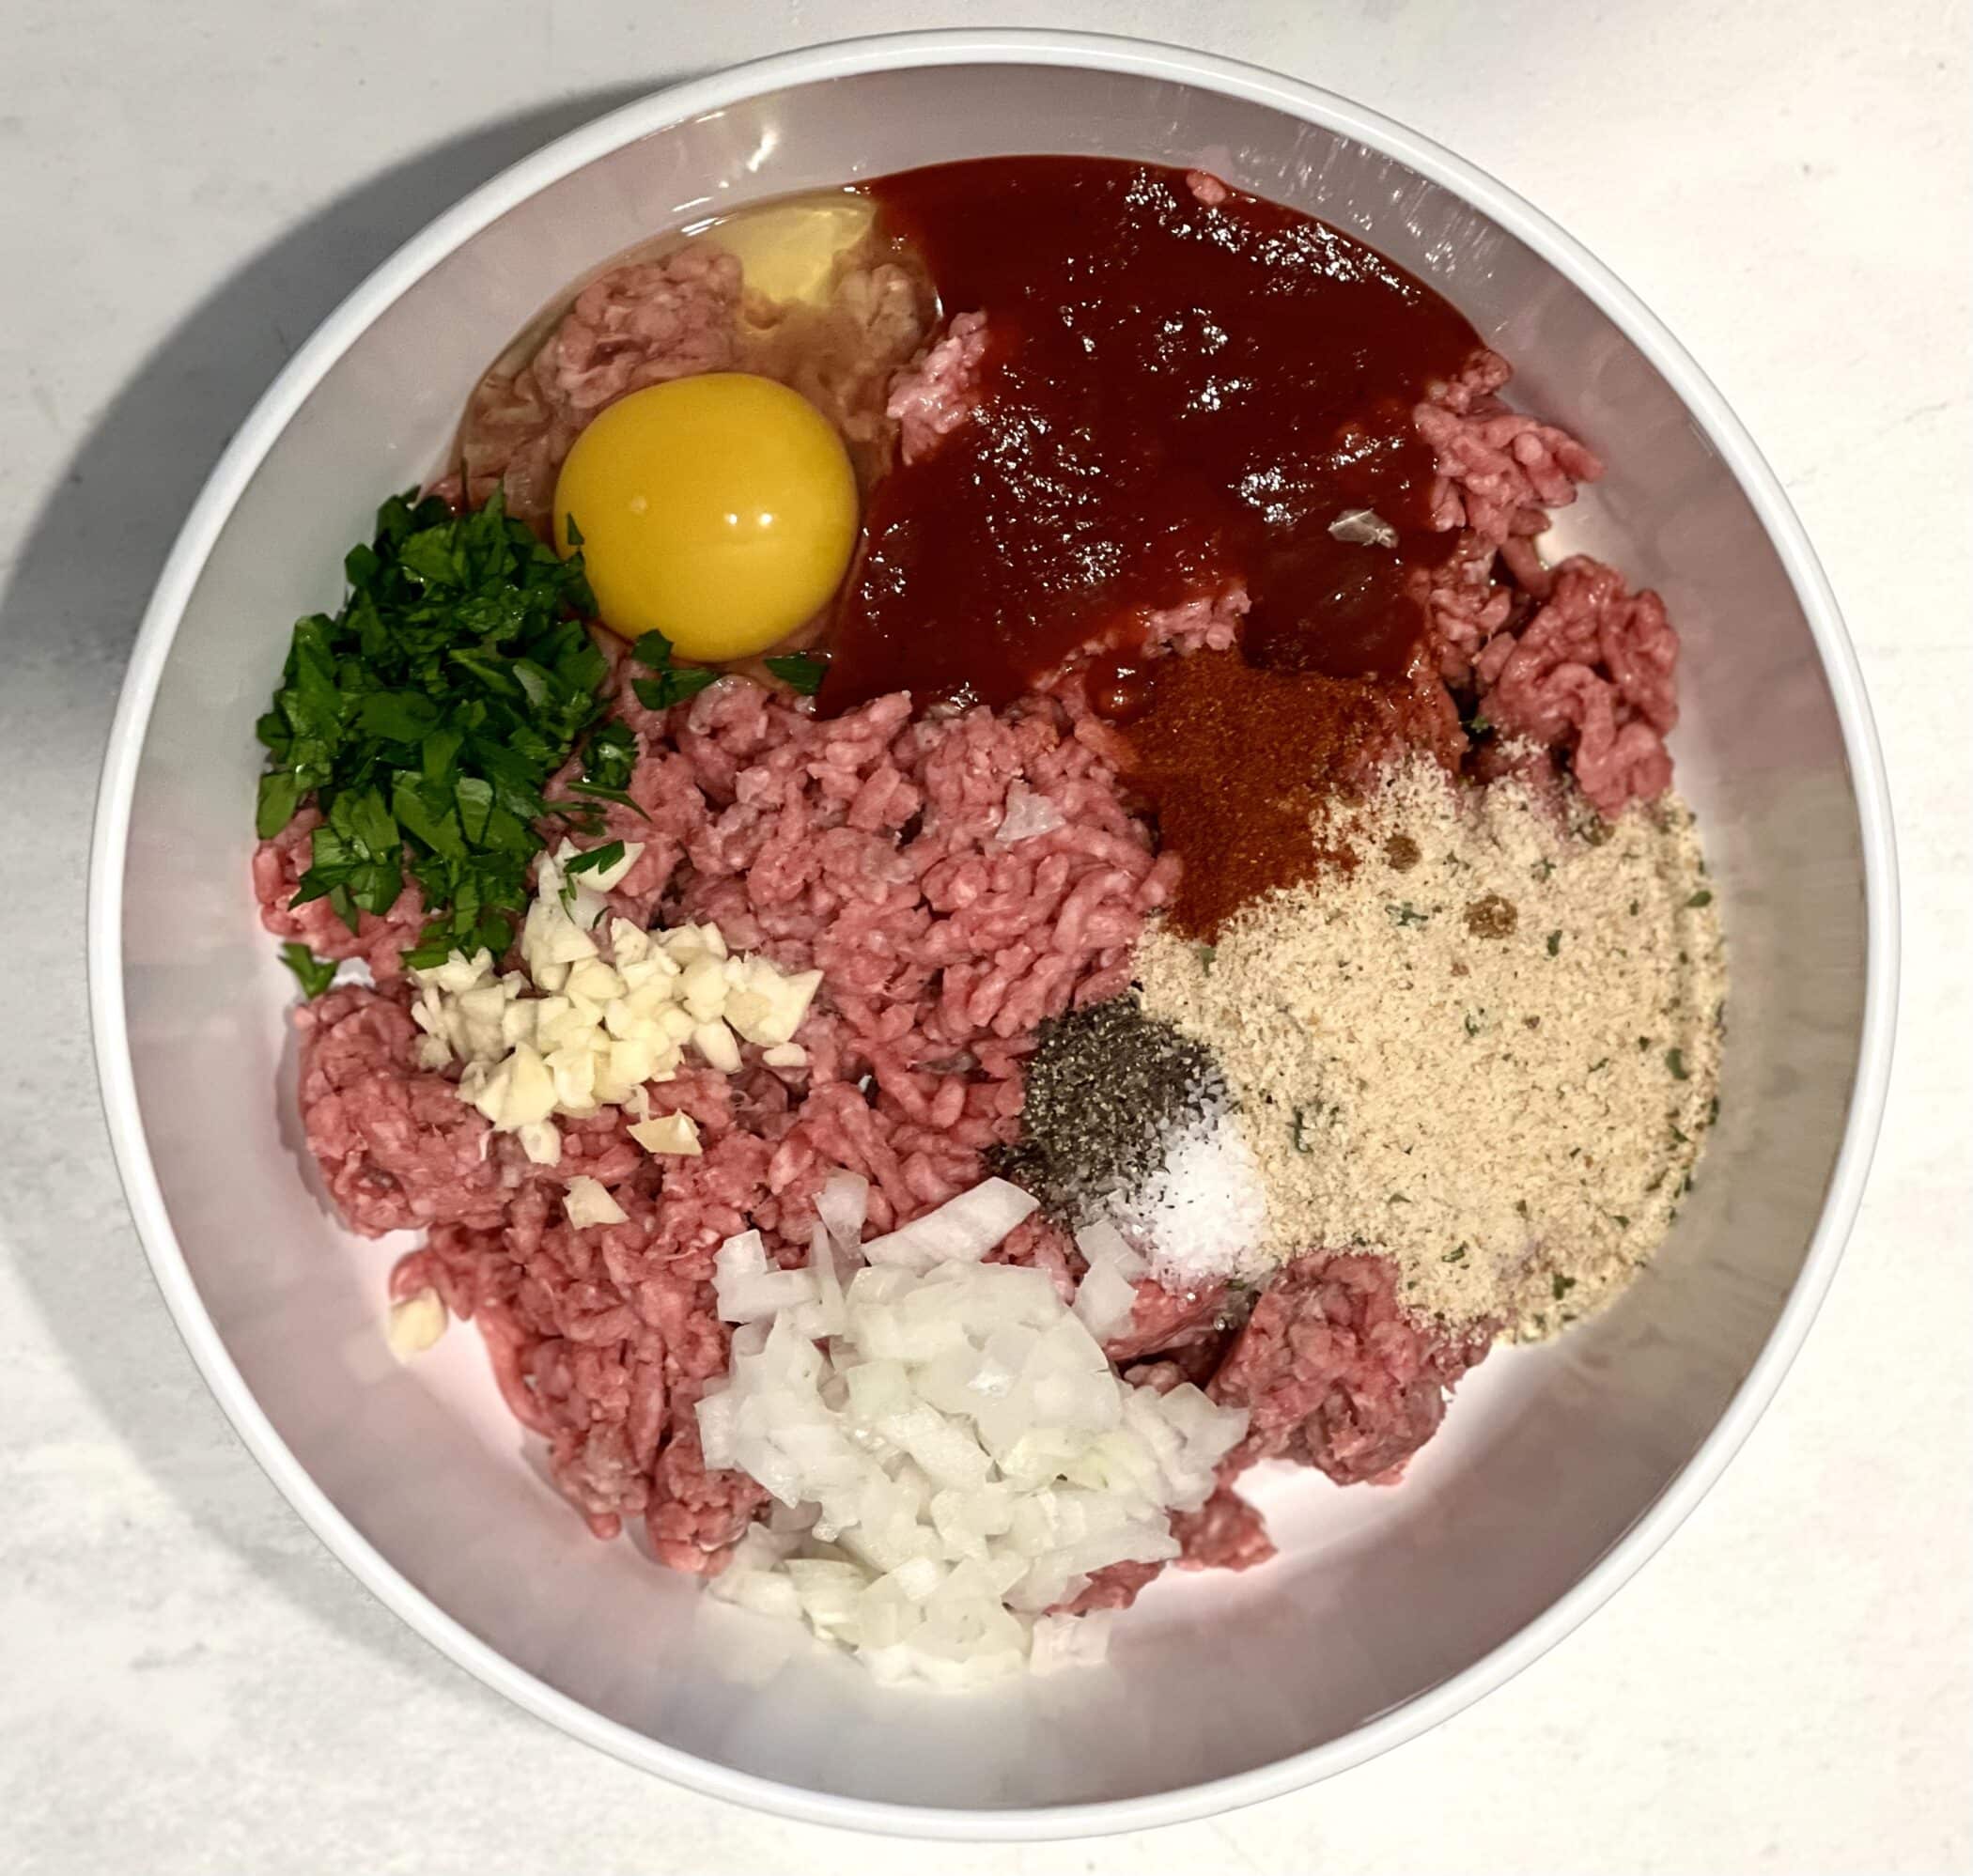 meatloaf ingredients in a mixing bowl